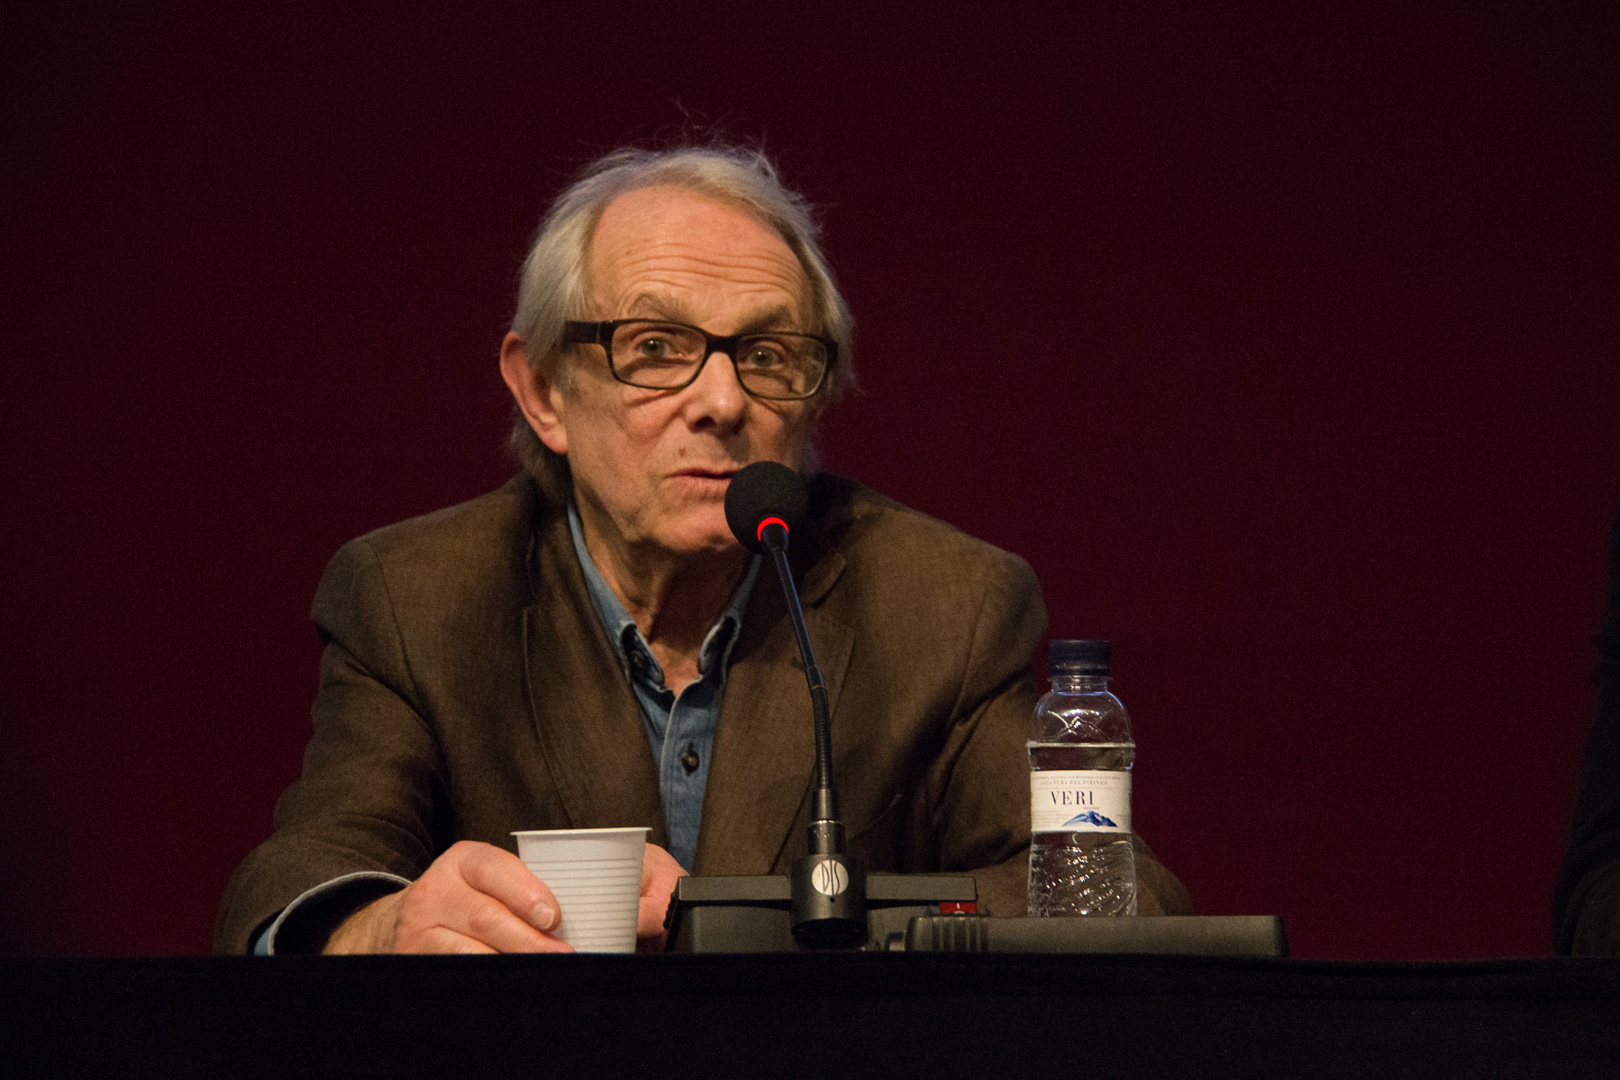 He is loathsome, but I will always defend Ken Loach’s right to offend me